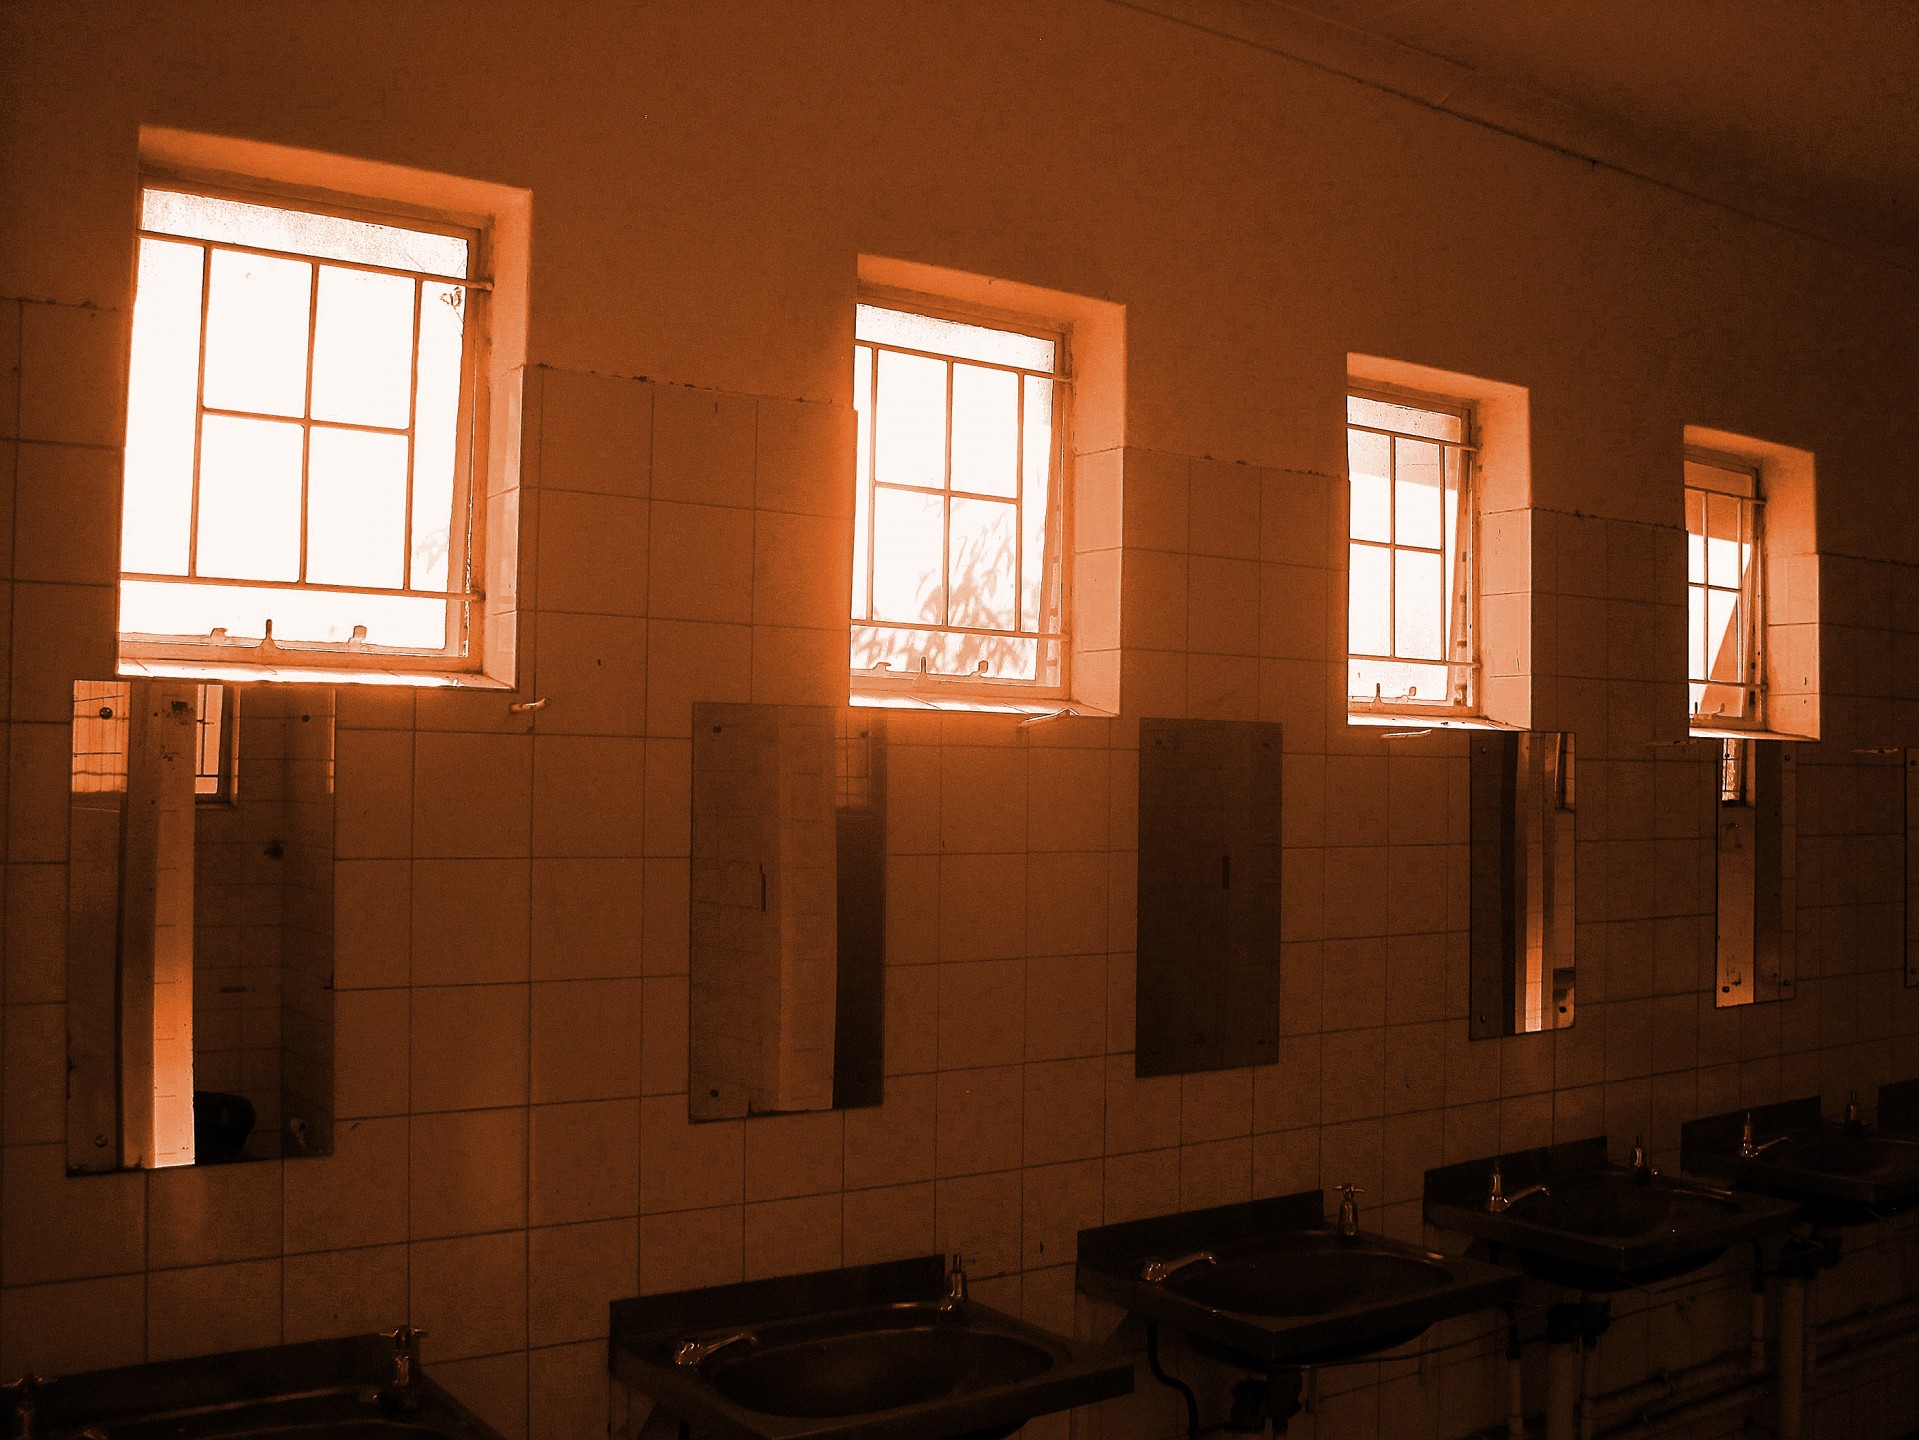 Old Bathroom In Sepia